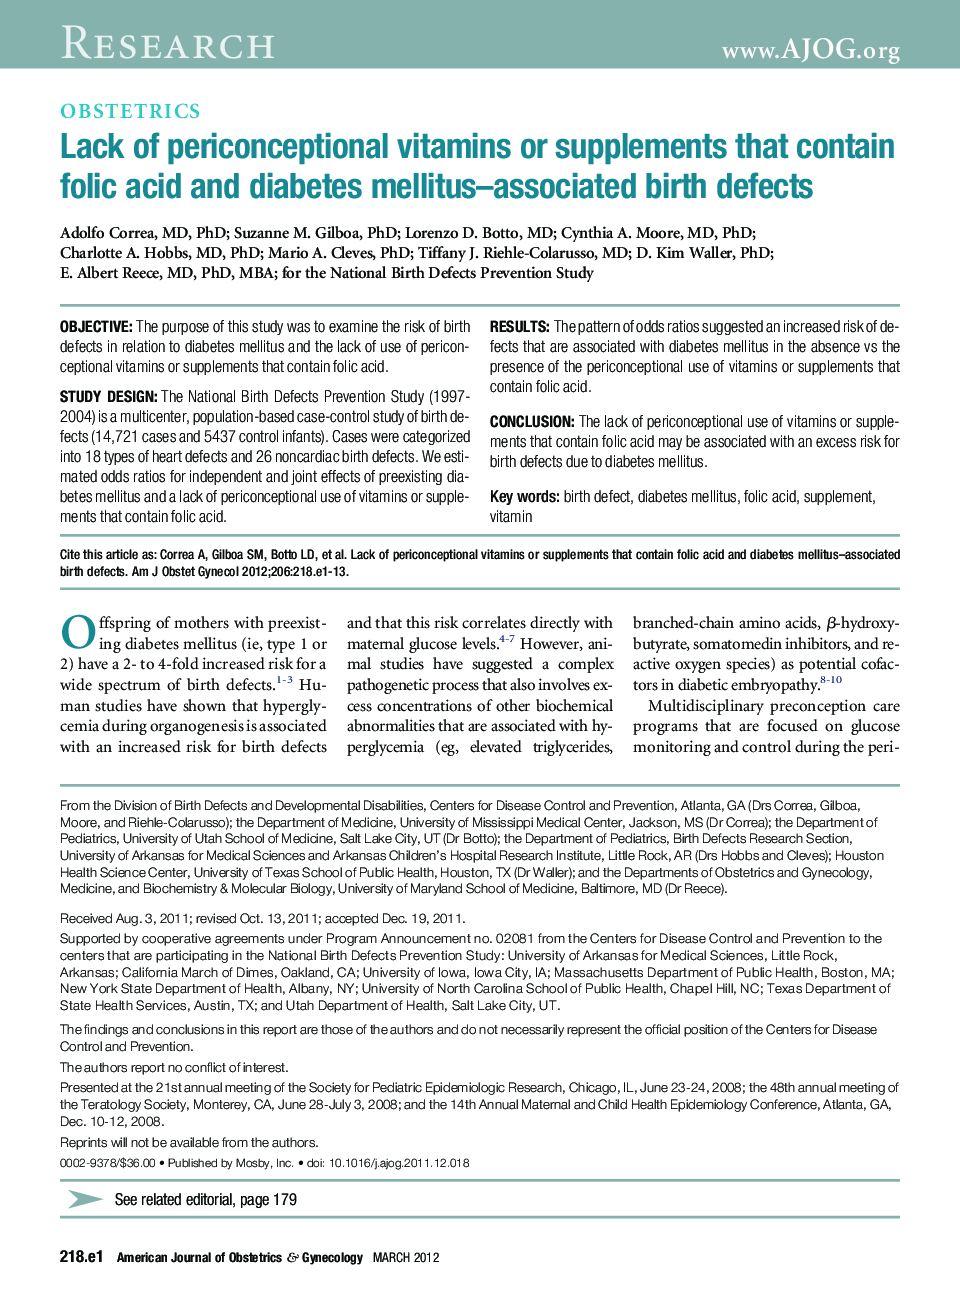 Lack of periconceptional vitamins or supplements that contain folic acid and diabetes mellitus-associated birth defects